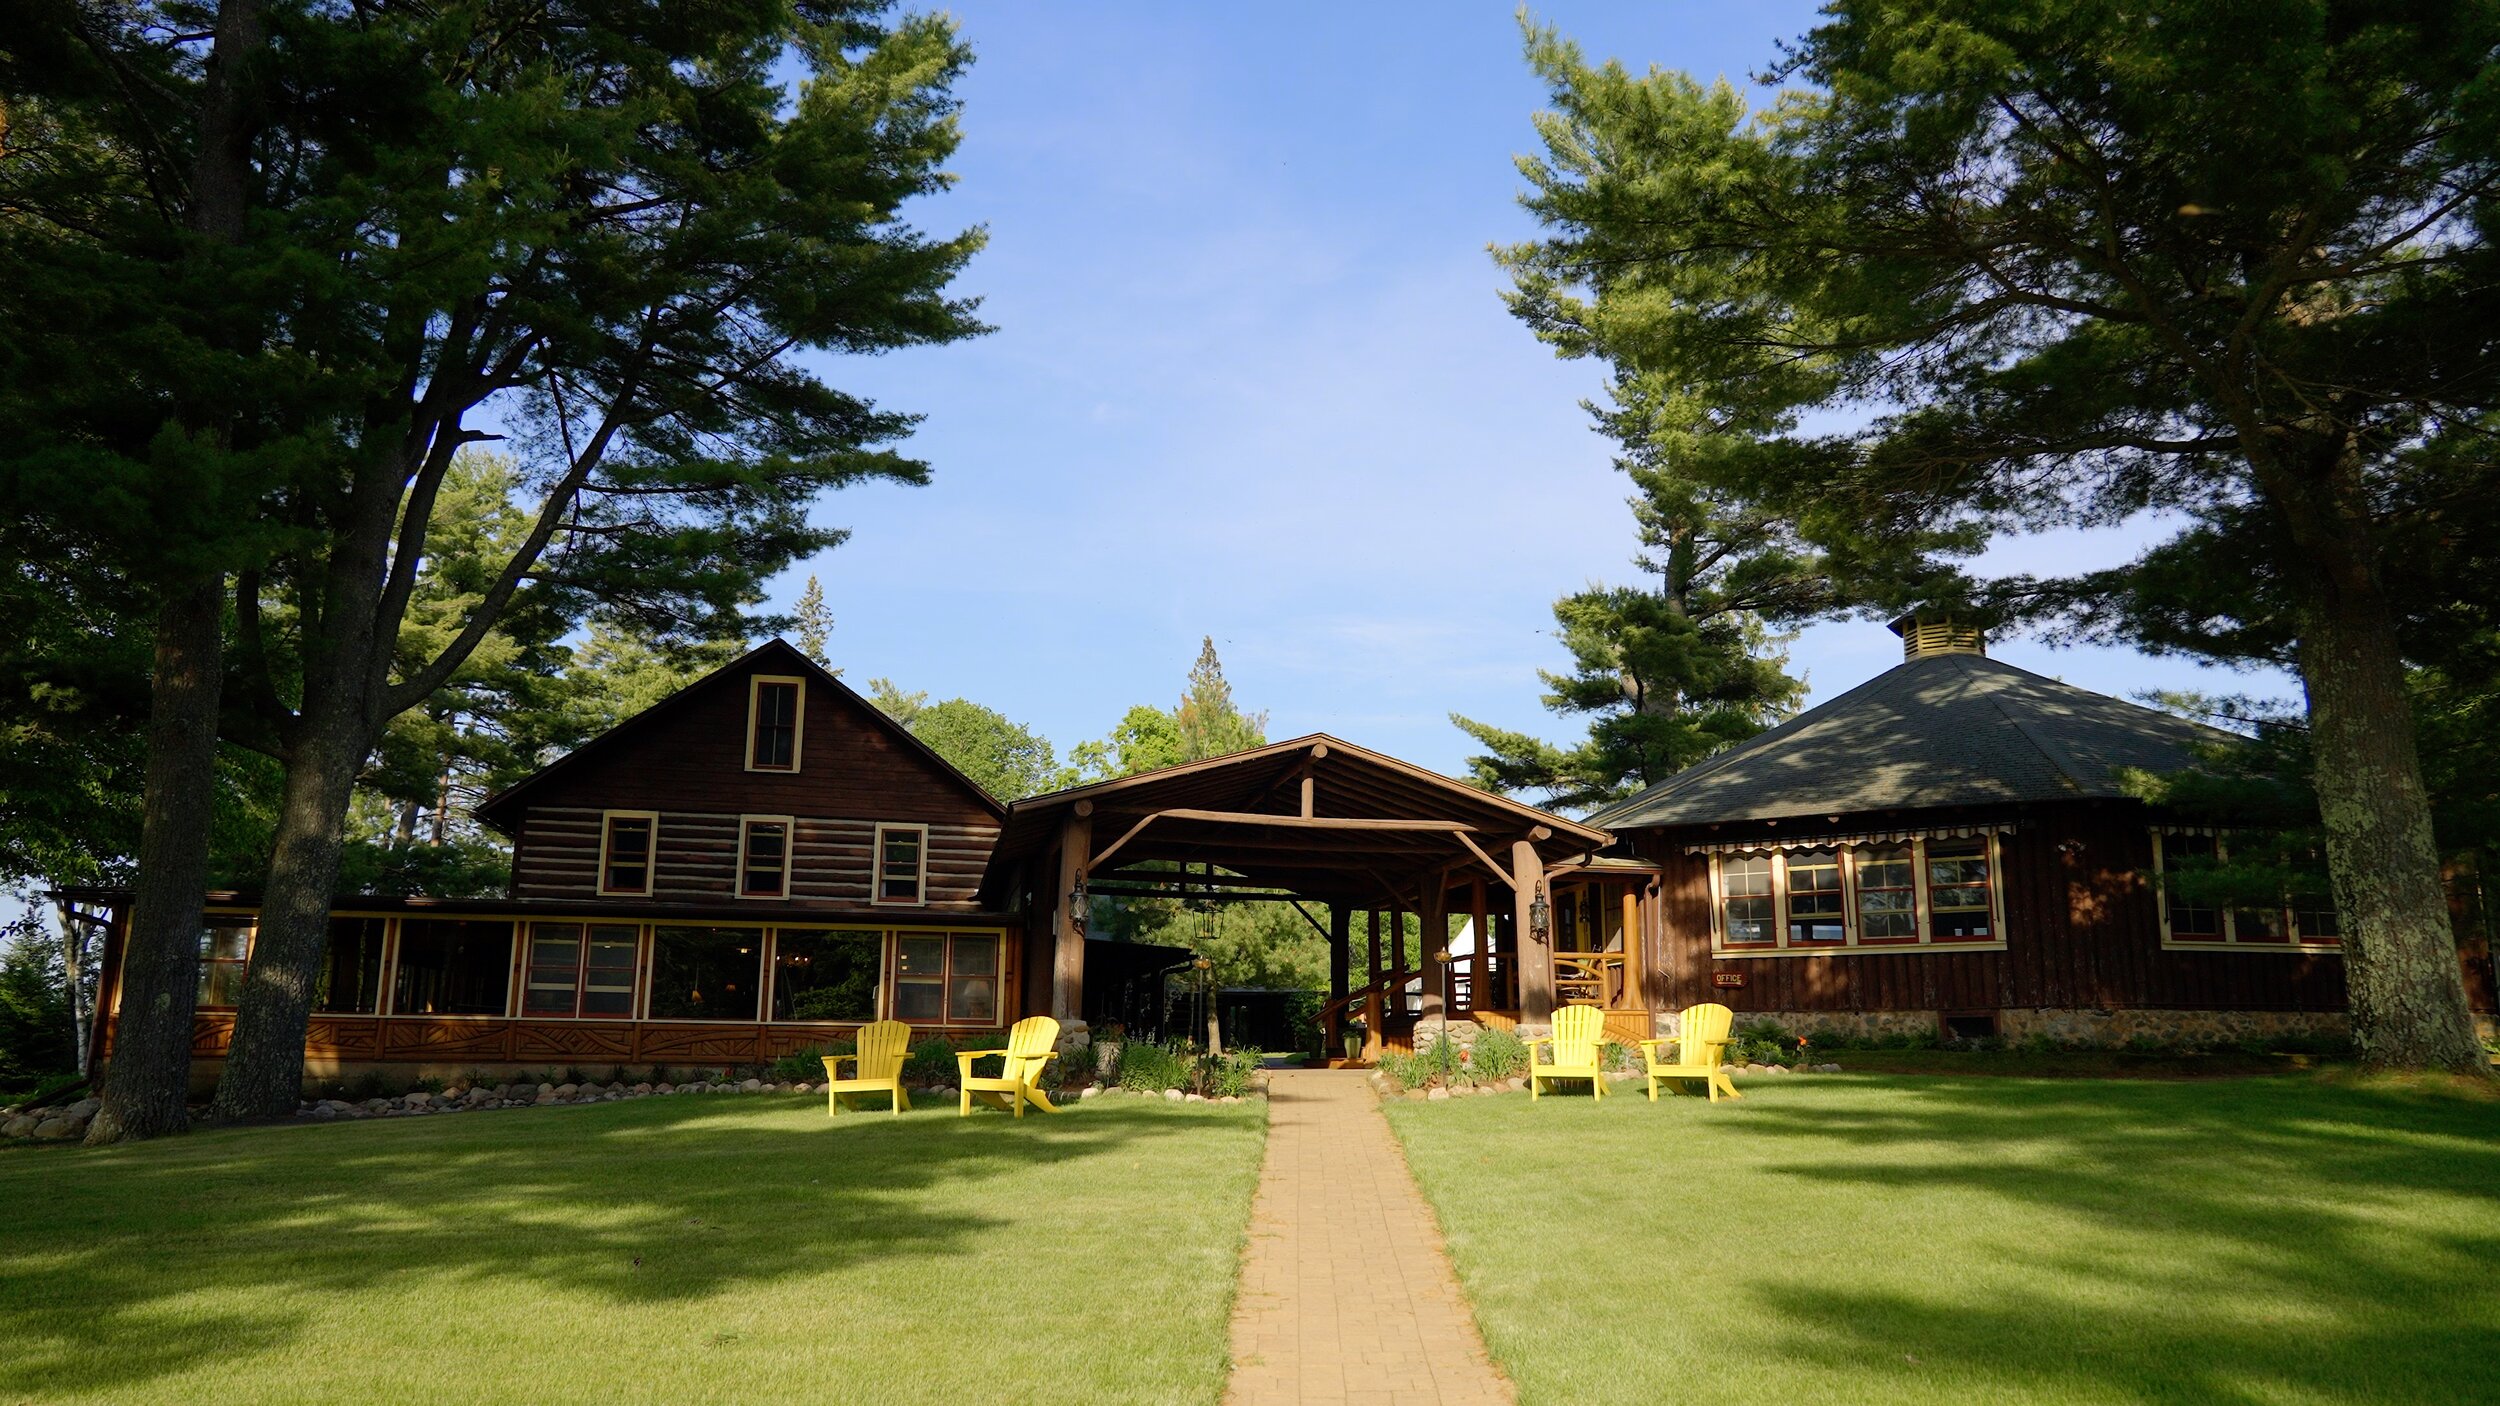 Coon's Franklin Lodge Wedding Venue in Northern Wisconsin